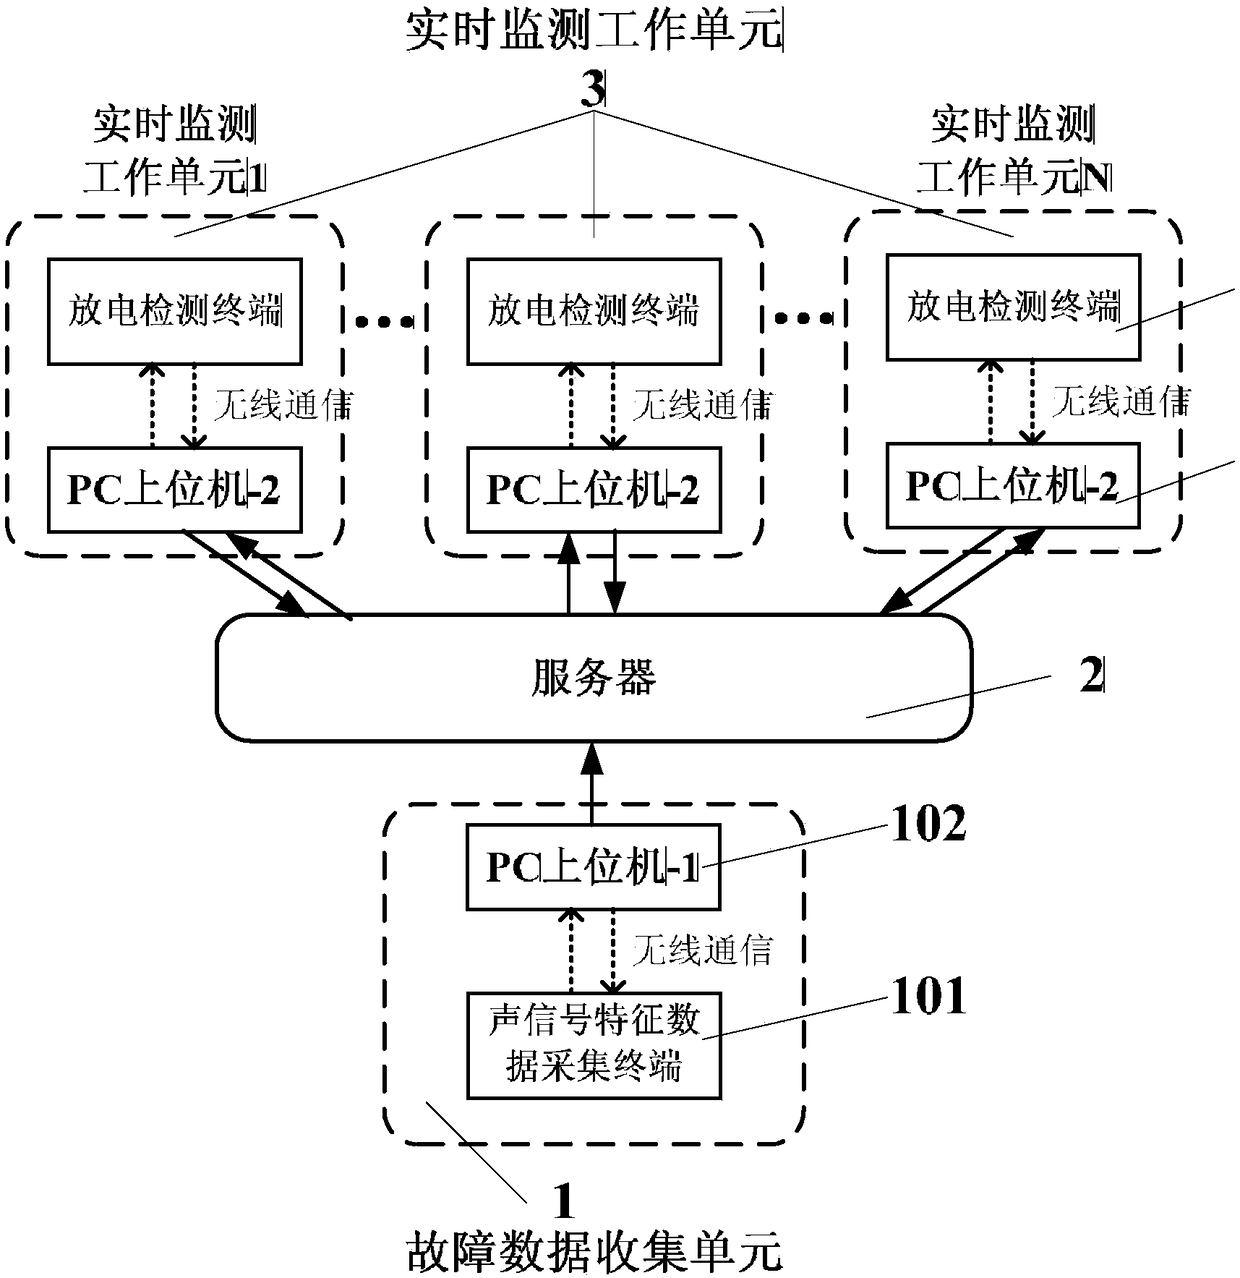 A transformer internal discharge pattern recognition method and fault diagnosis system